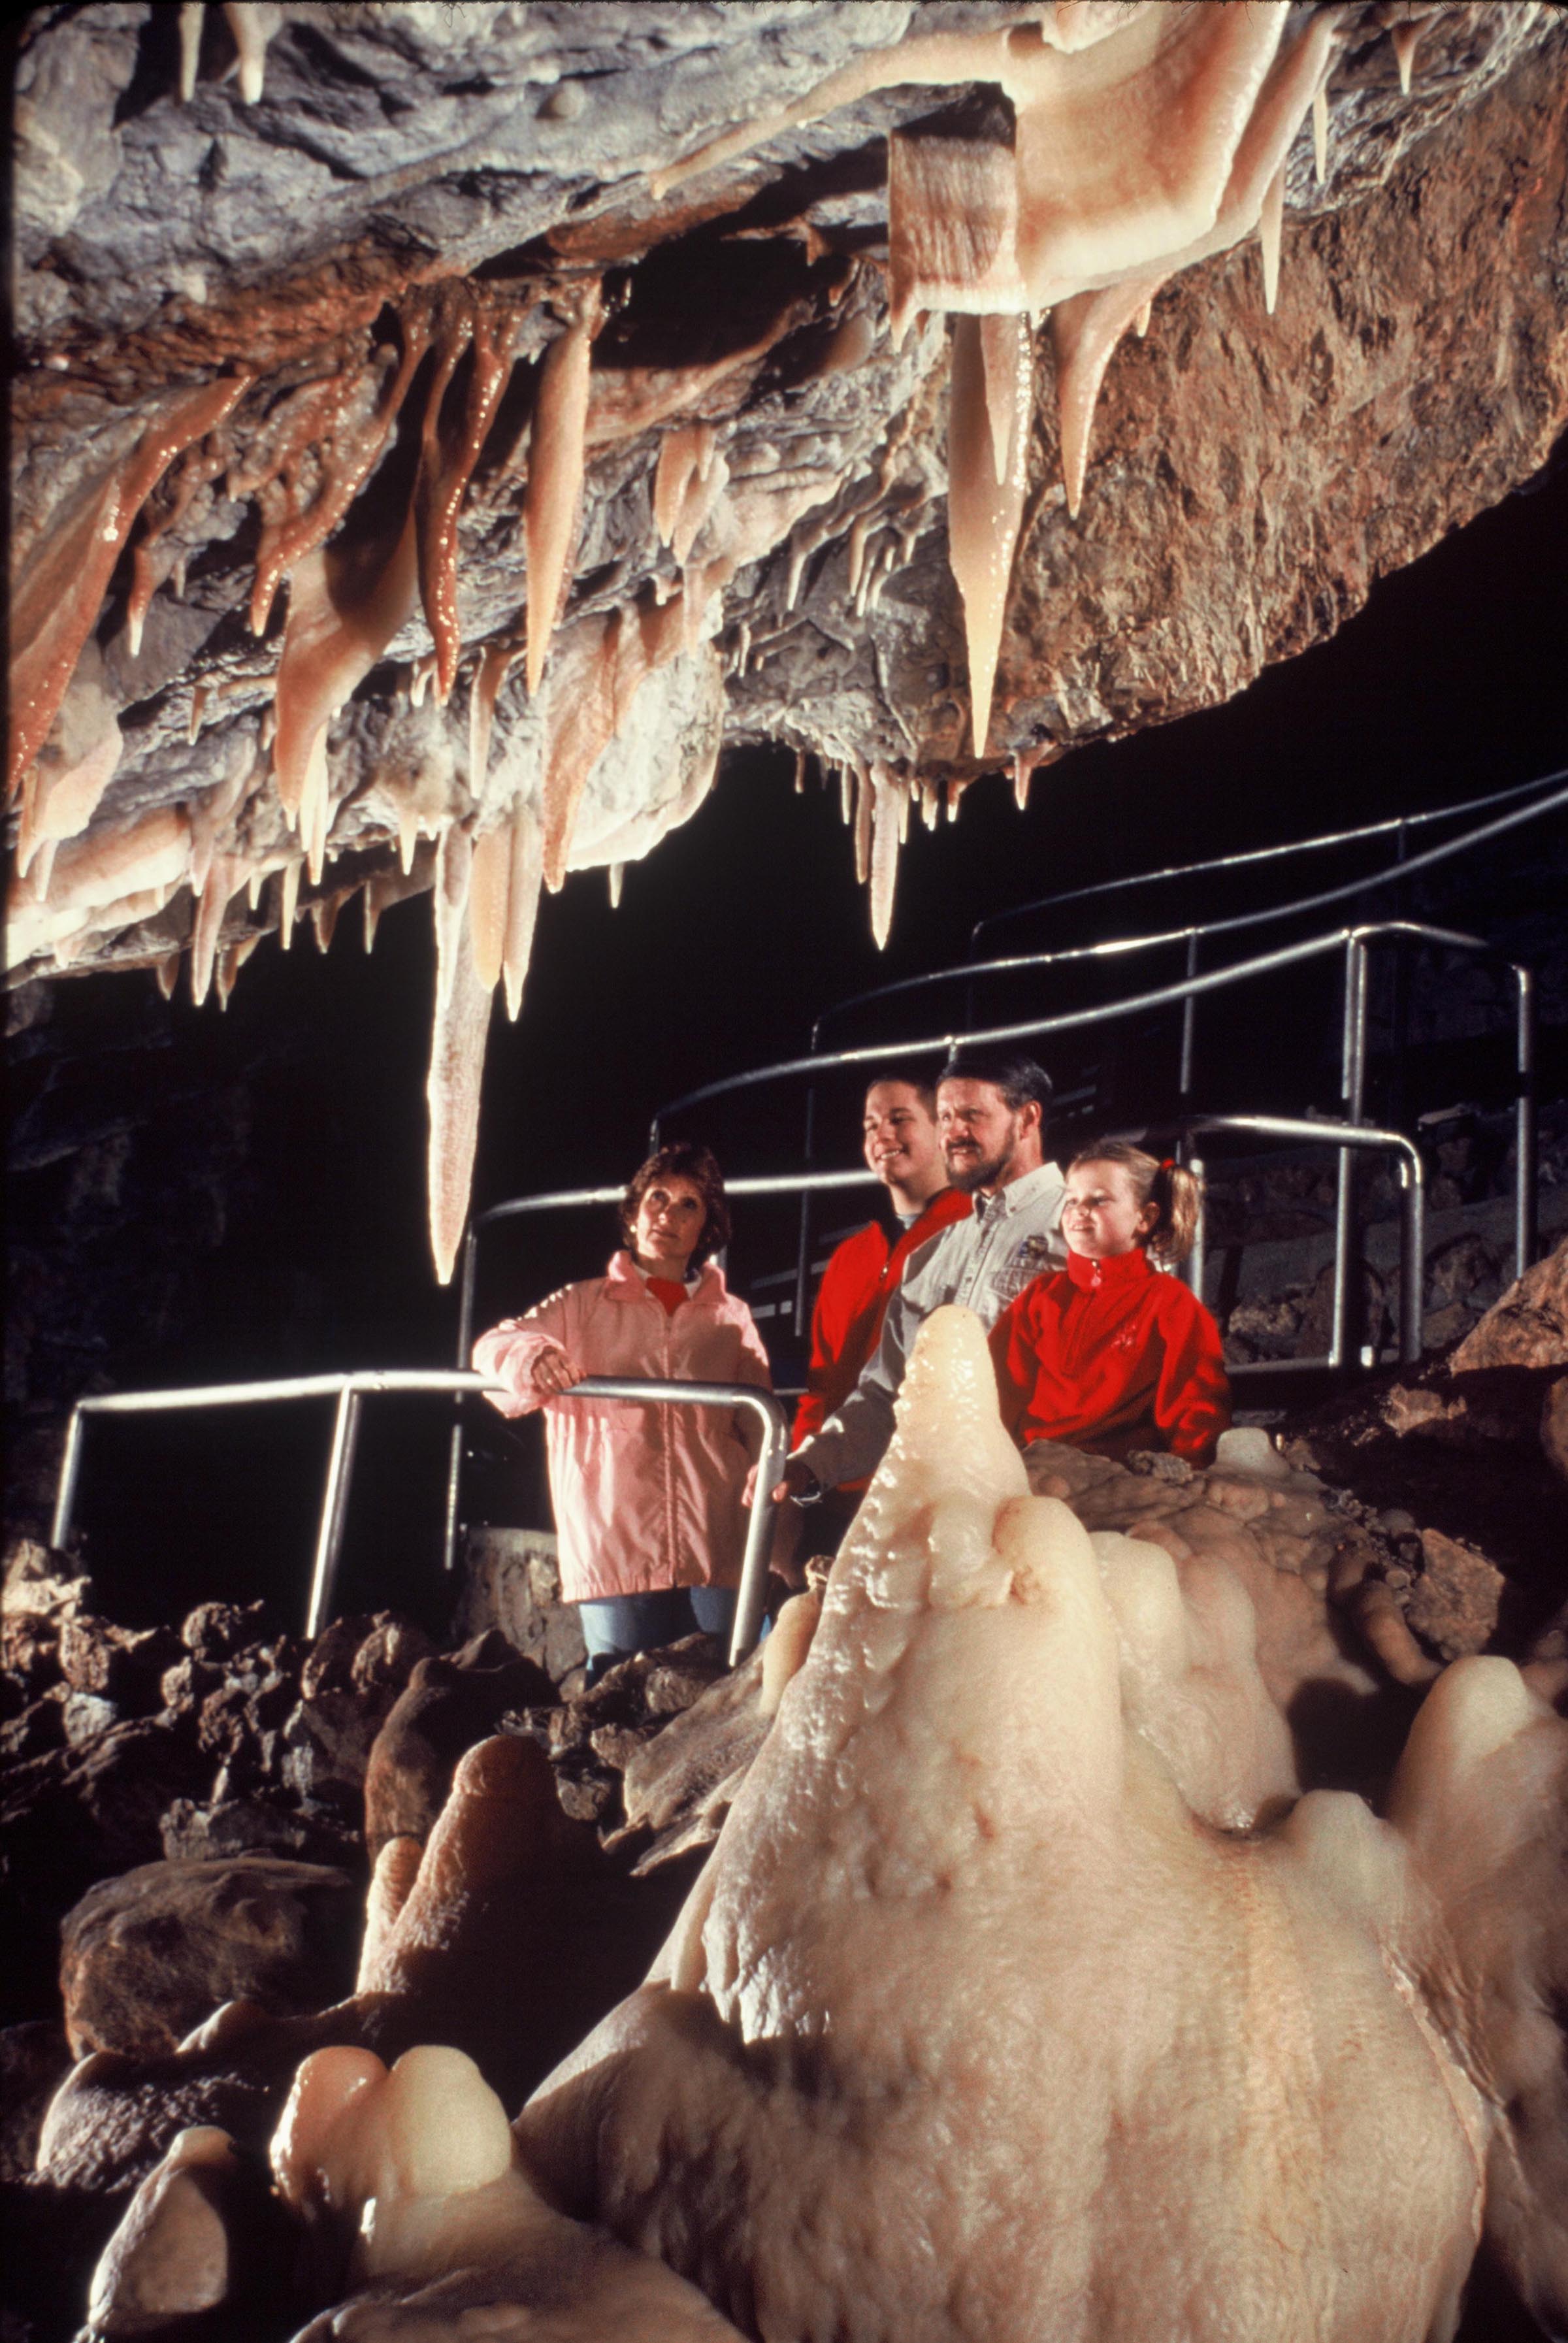 Glenwood Caverns King's Row Tour showcases rare and dazzling cave formations